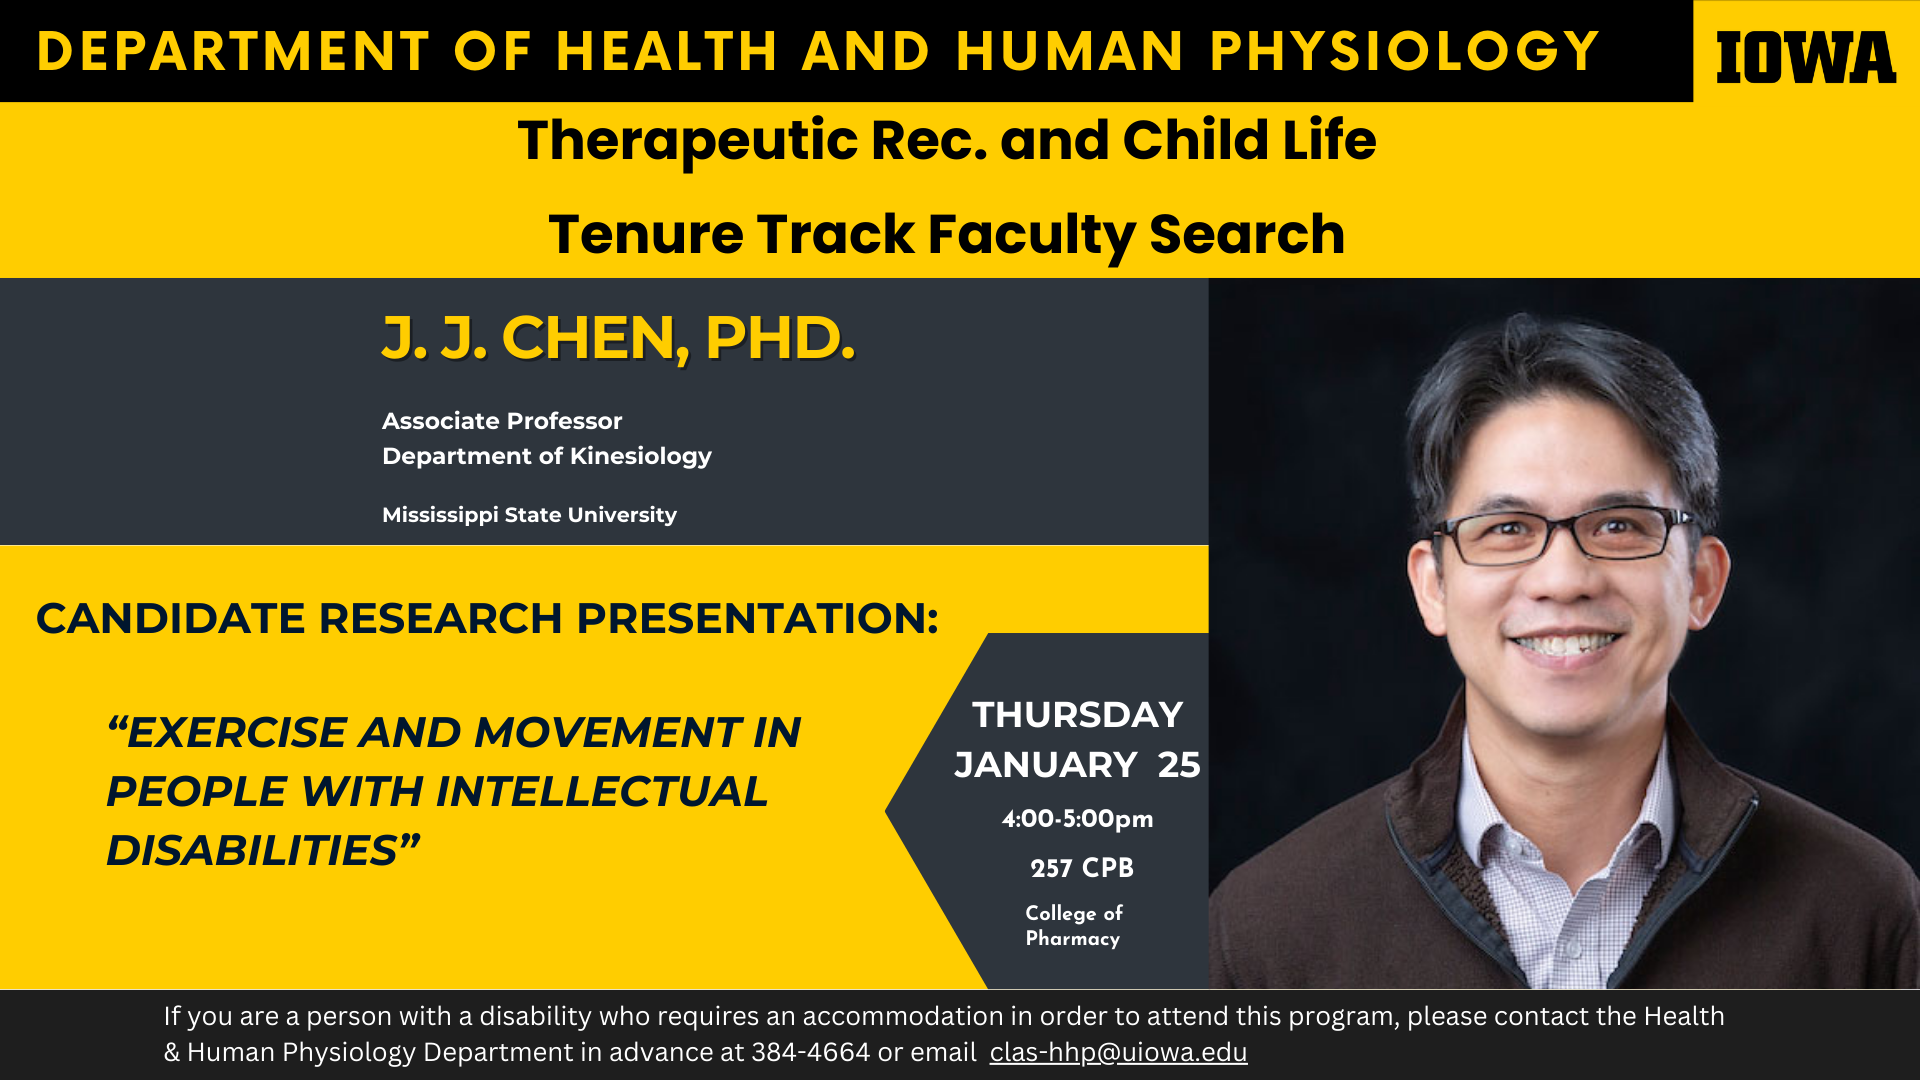 Tenure Track Faculty Search